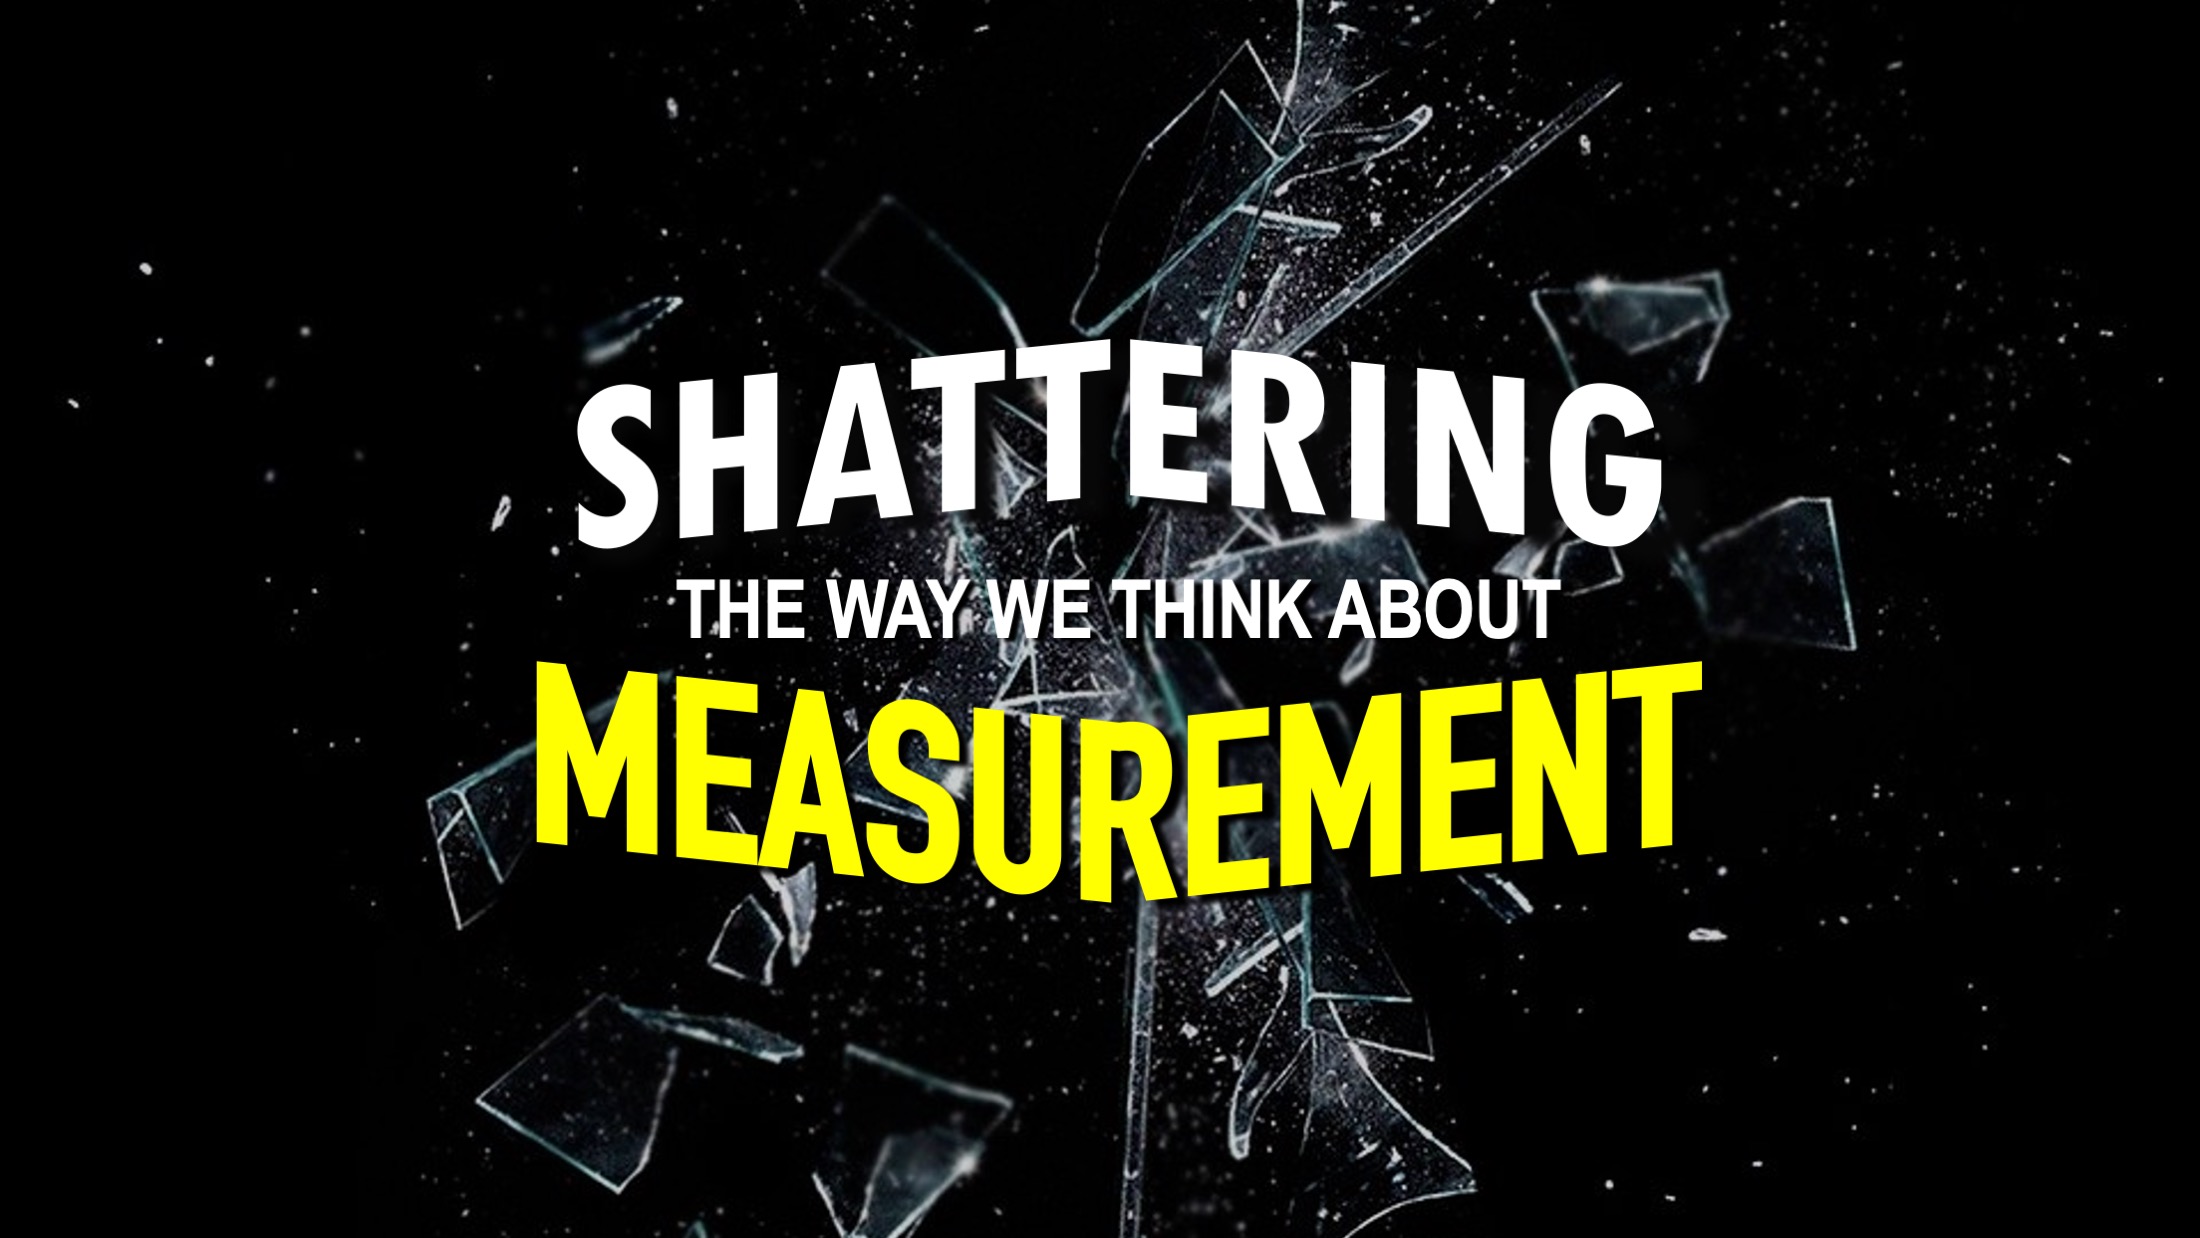 Shattering the Way We Think About Measurement